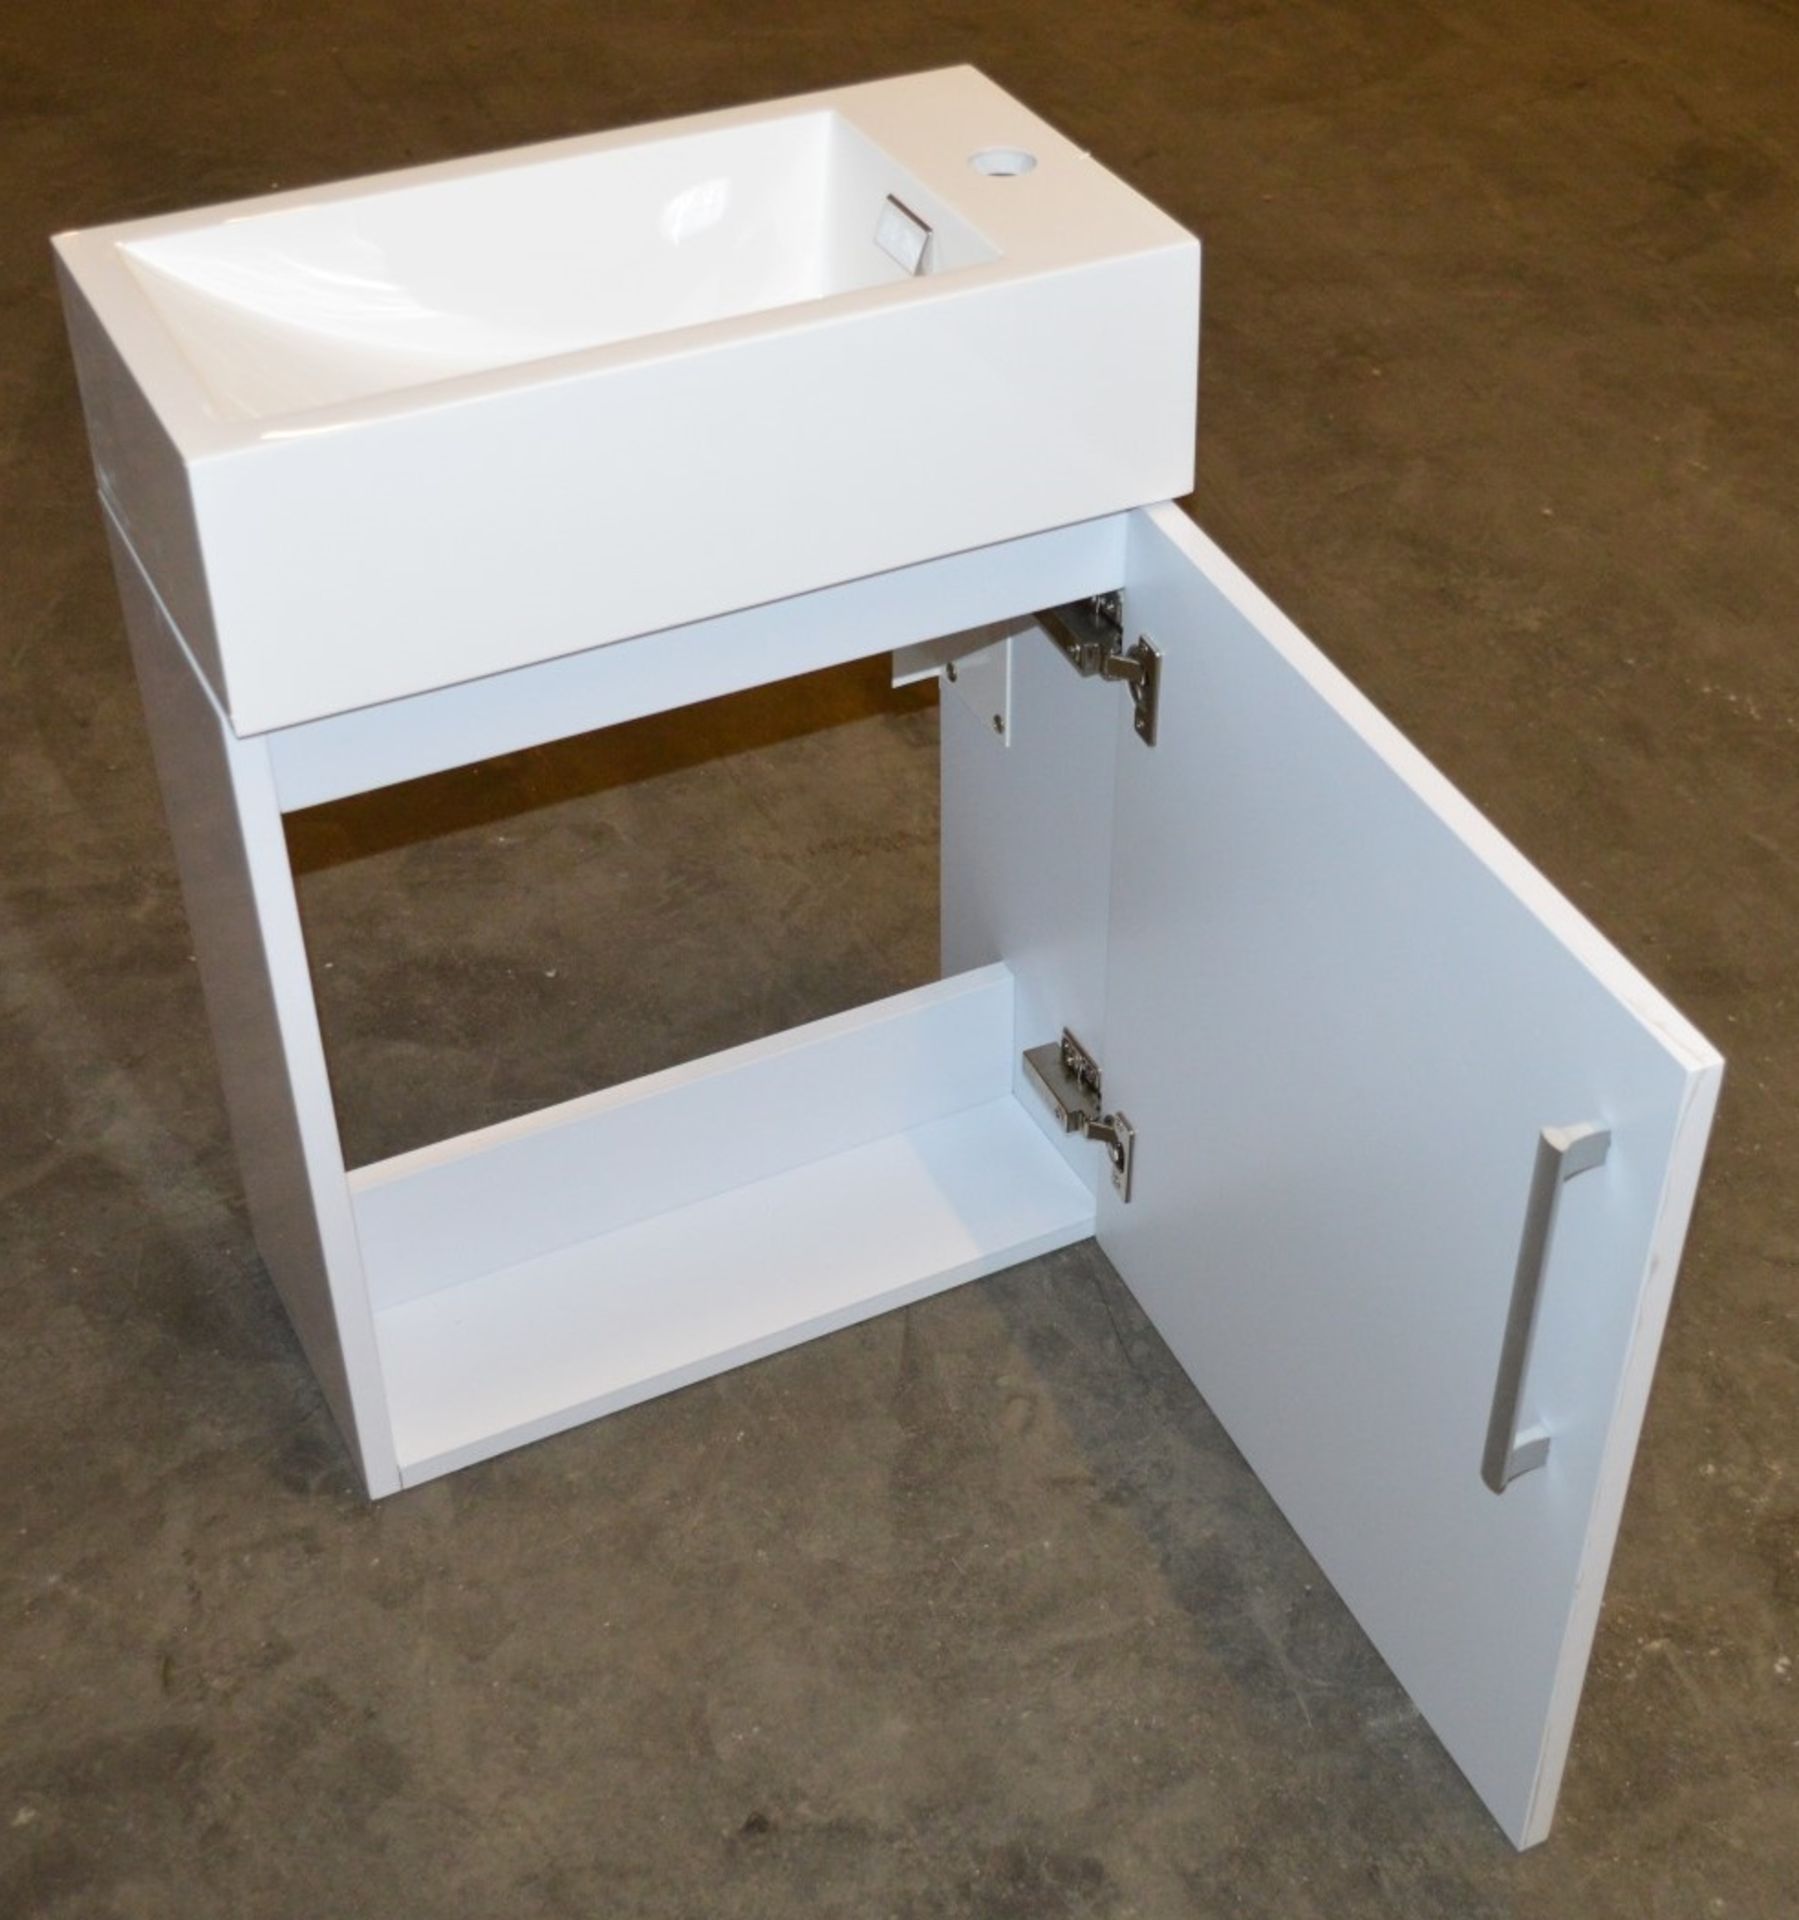 1 x Vogue Bathrooms JUNO 500mm Wall Hung Bathroom Vanity Unit With Heavy Resin Composite Sink - Image 5 of 7